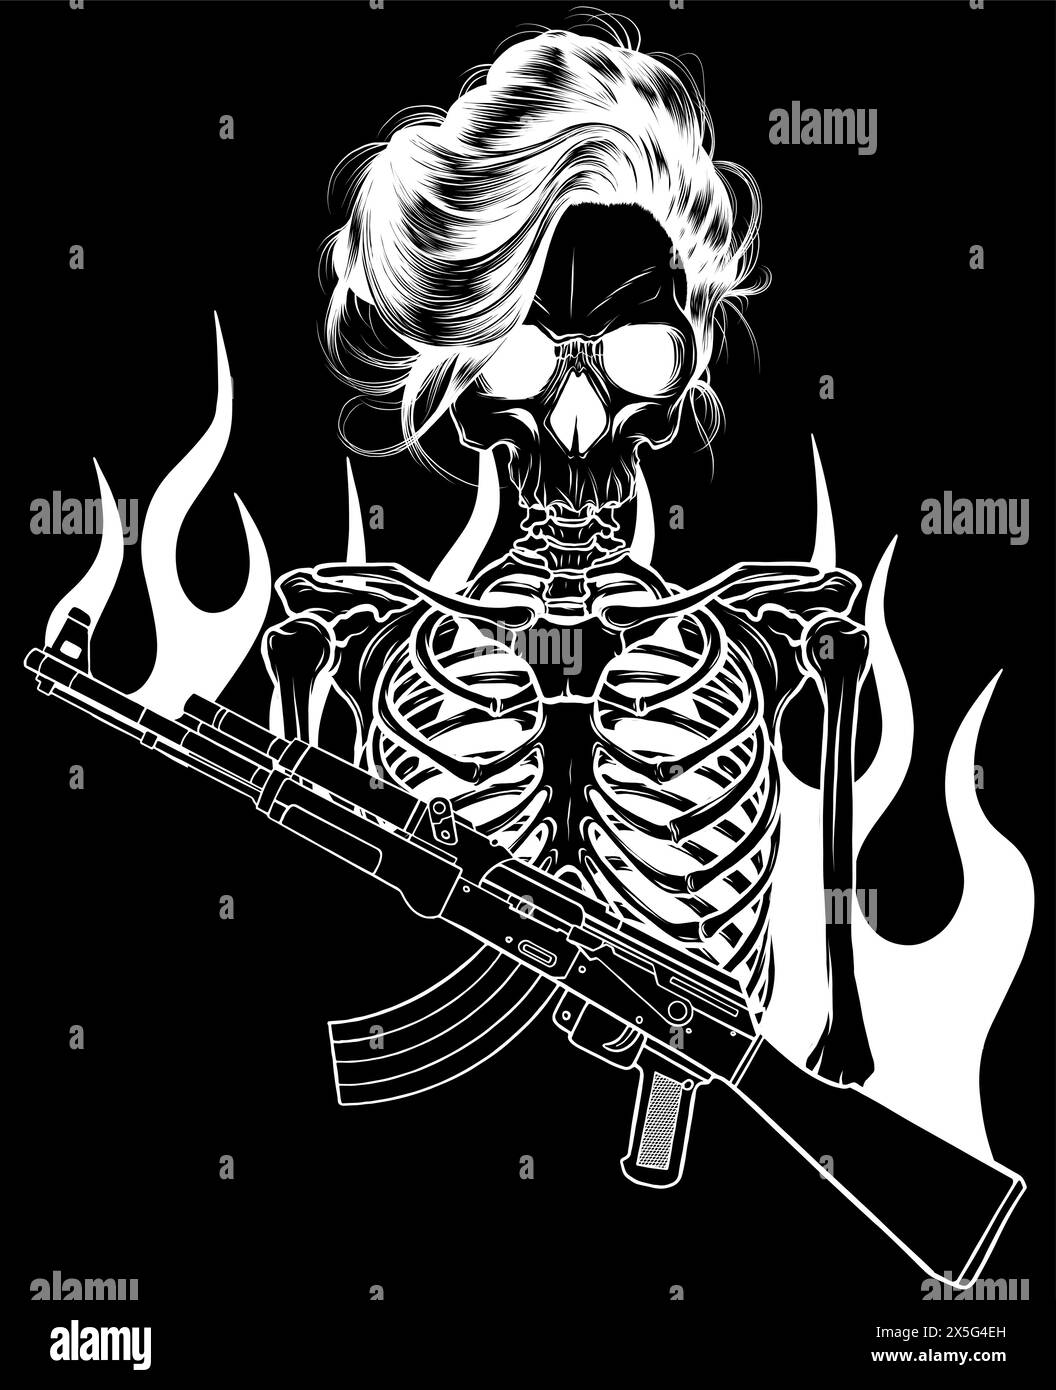 white silhouette of woman Skeleton holding assault rifle with flames vector illustration design on black background Stock Vector